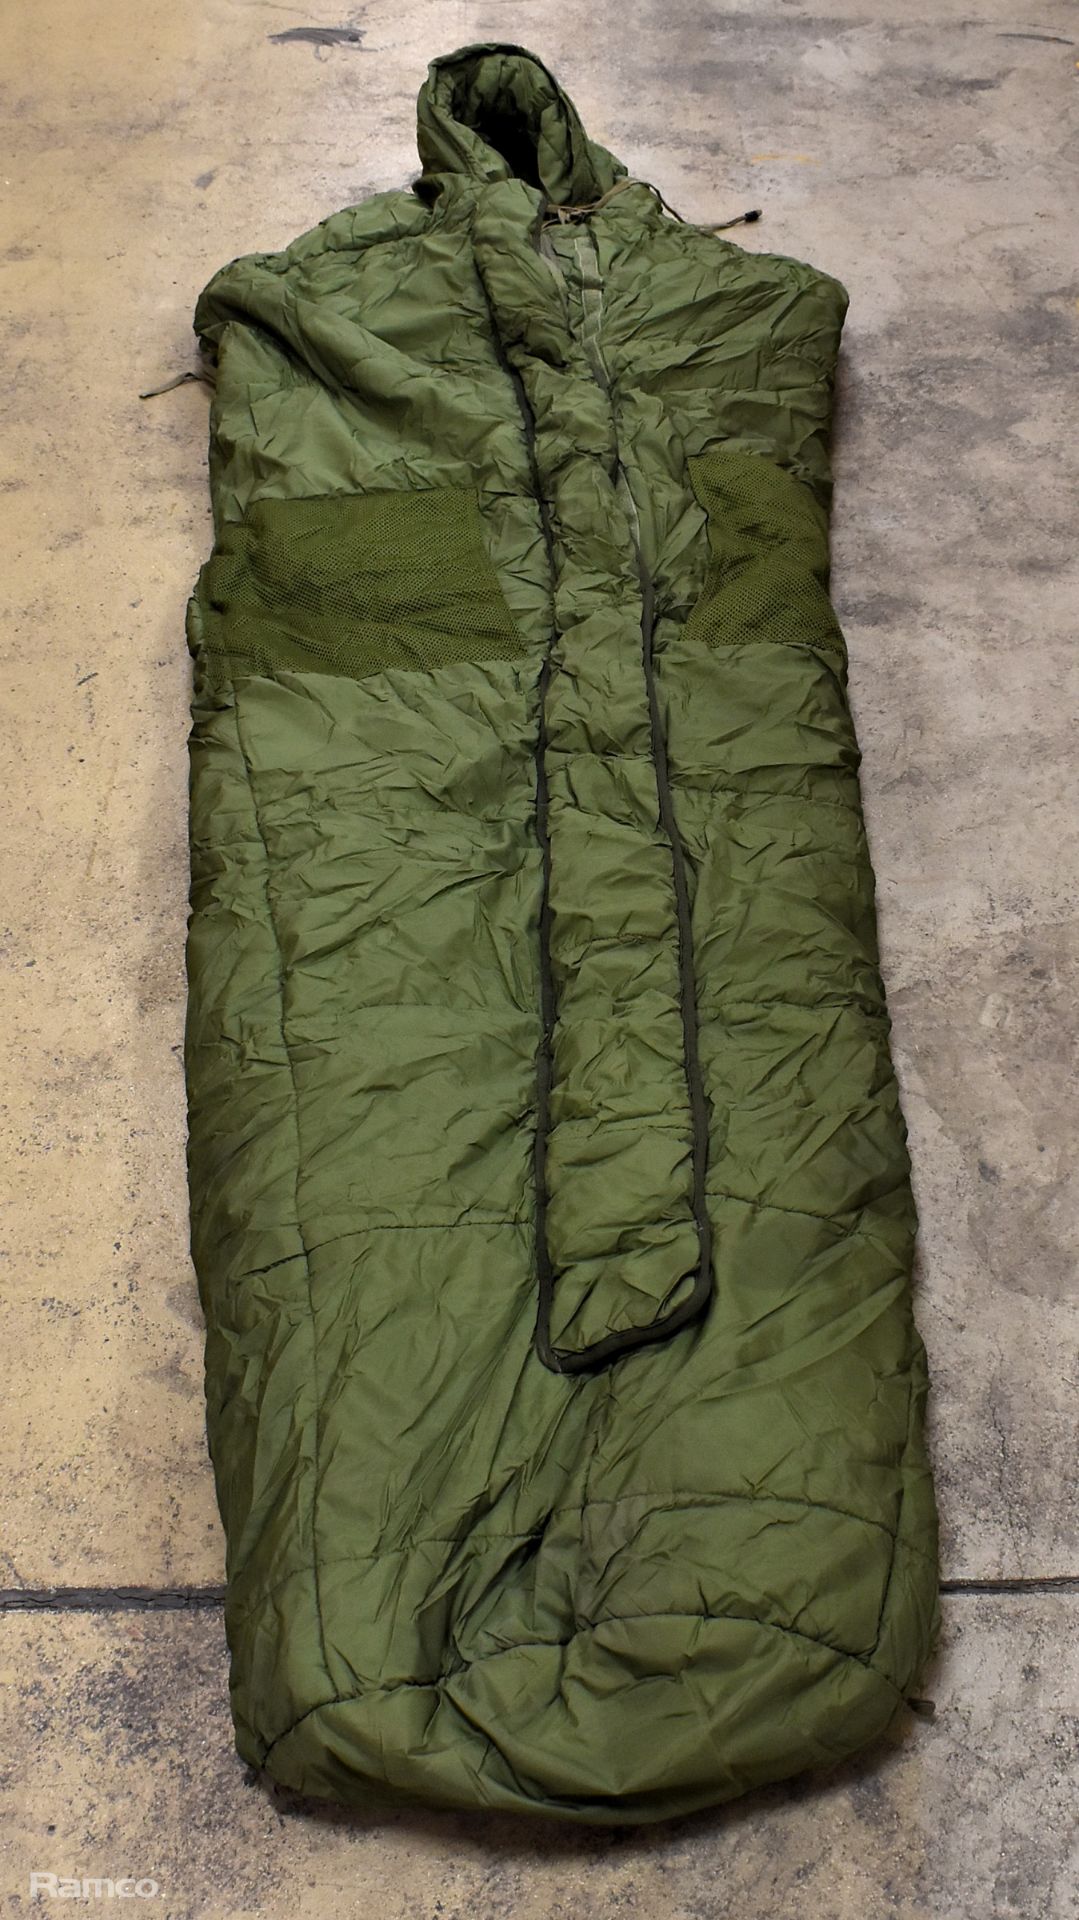 30x Sleeping bags - mixed grades and sizes - Image 2 of 8